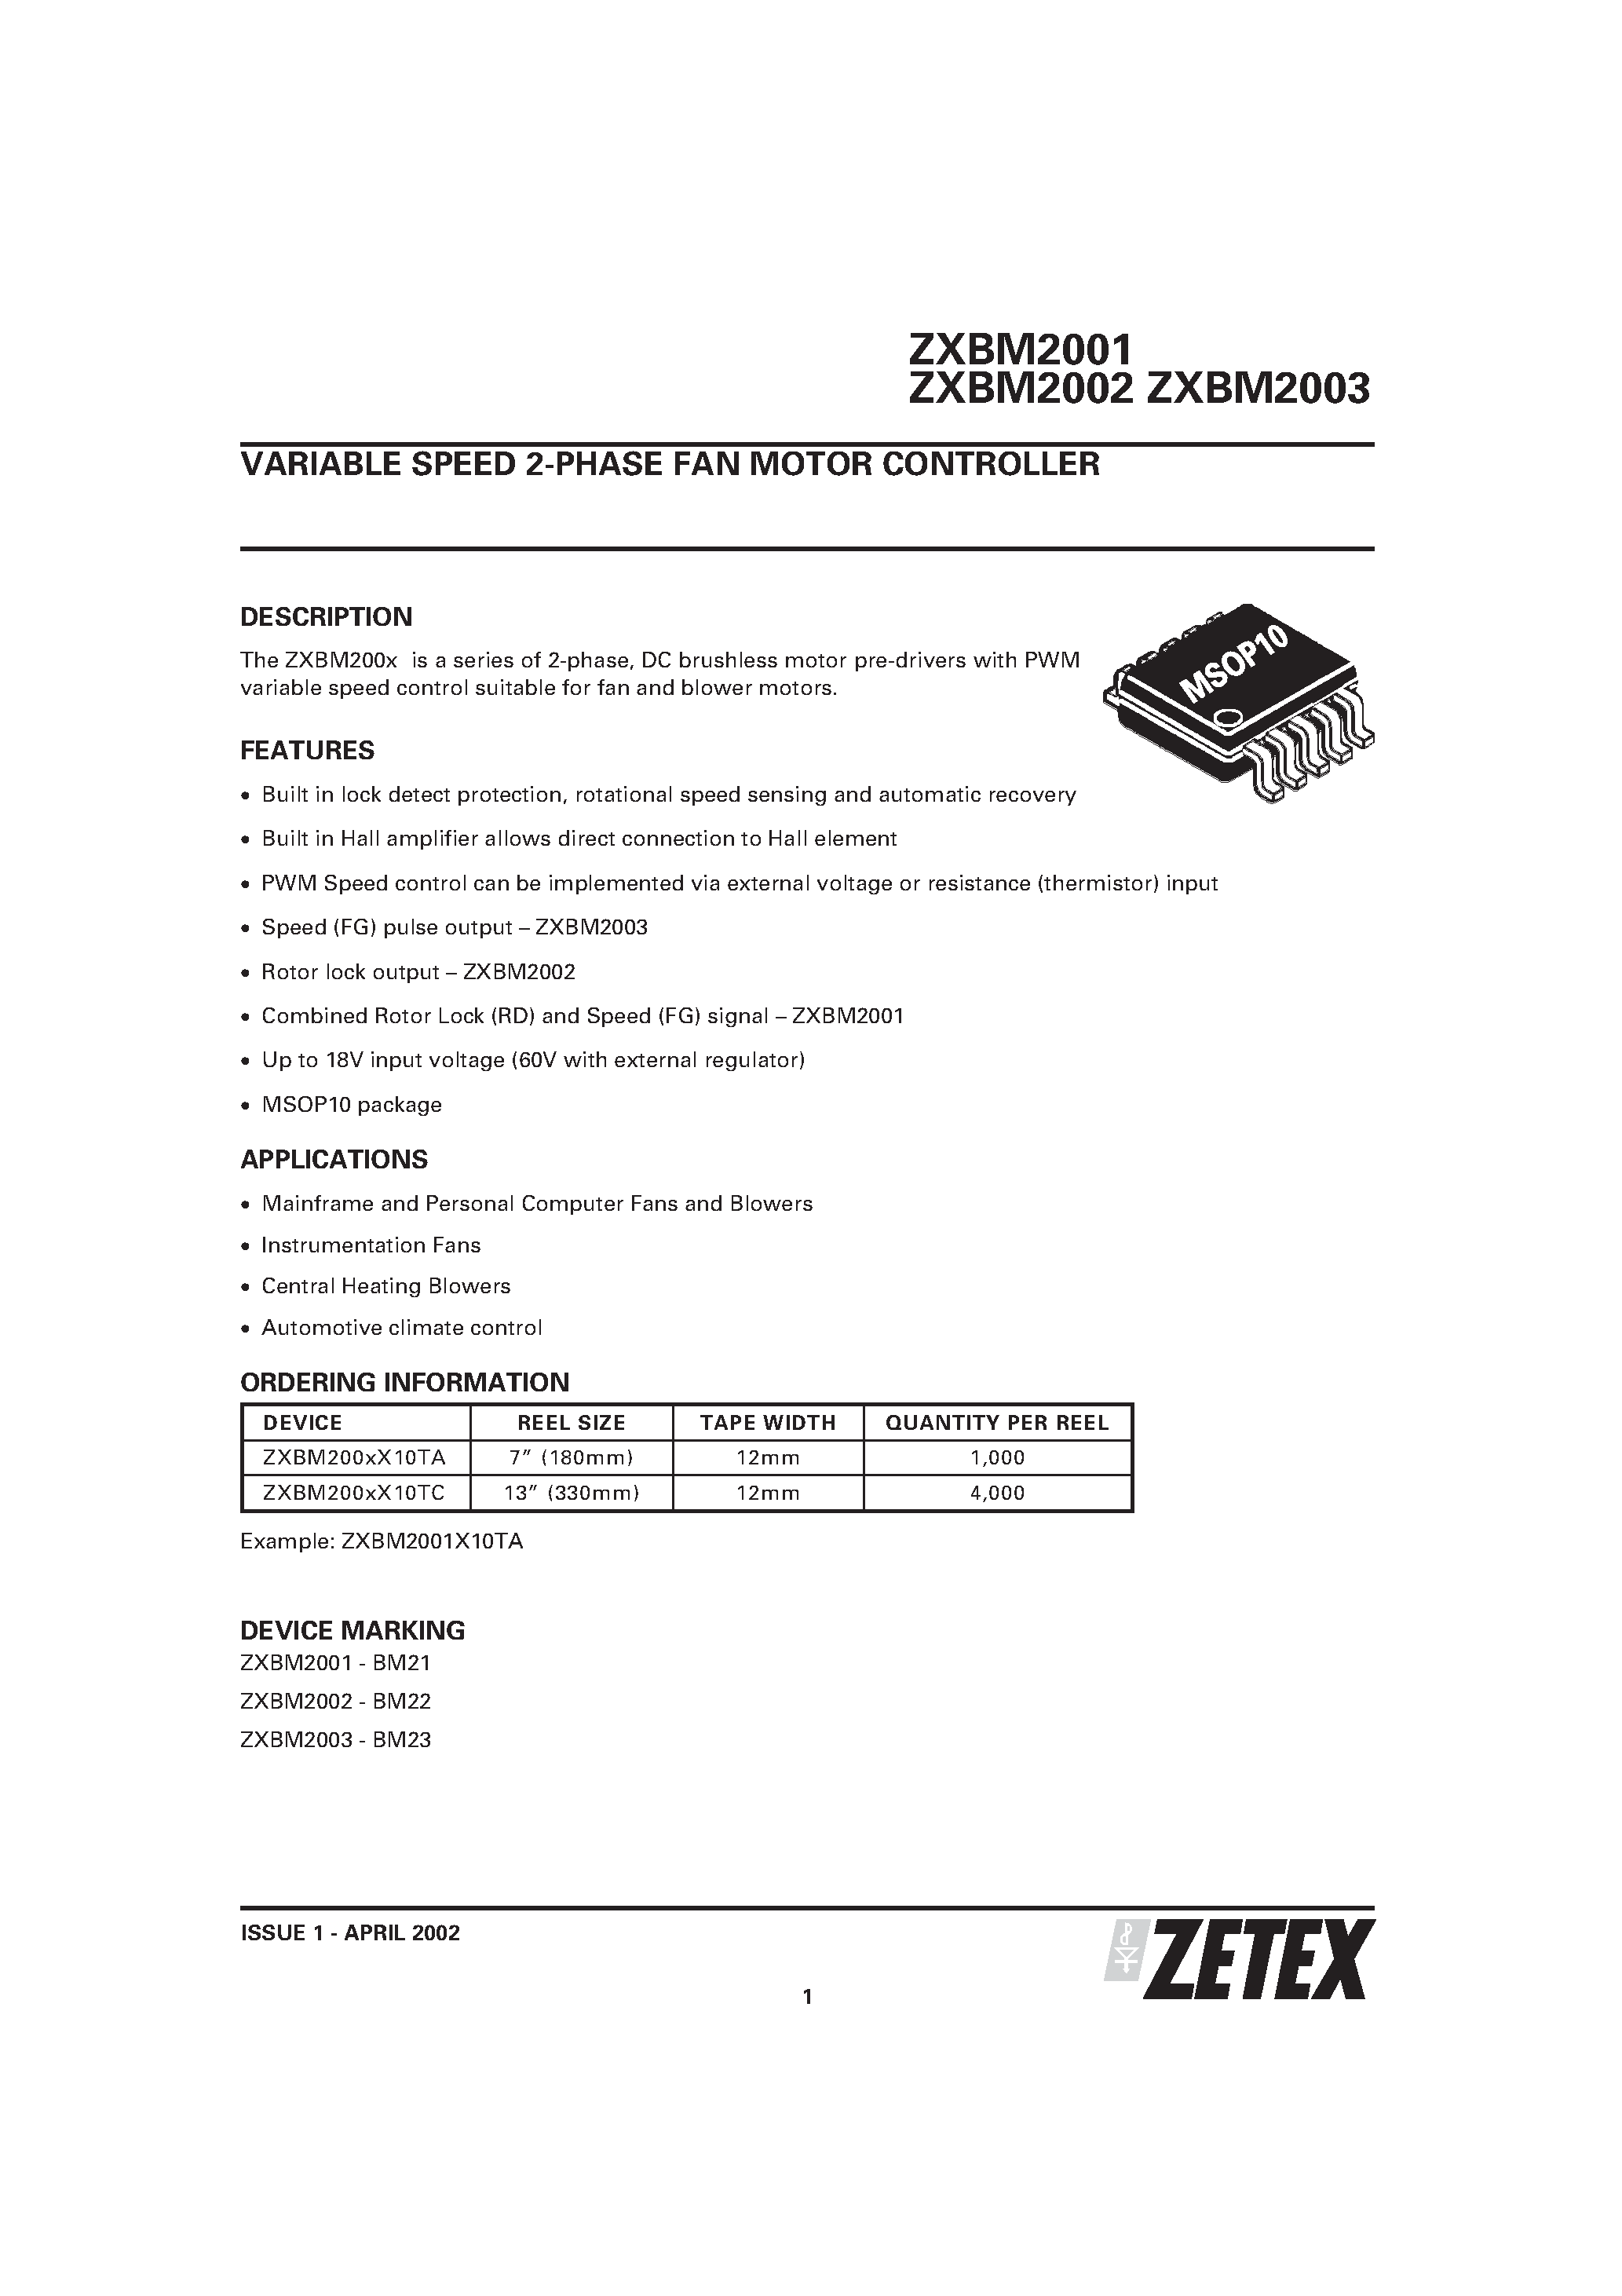 Datasheet ZXBM2002 - VARIABLE SPEED 2-PHASE FAN MOTOR CONTROLLER page 1